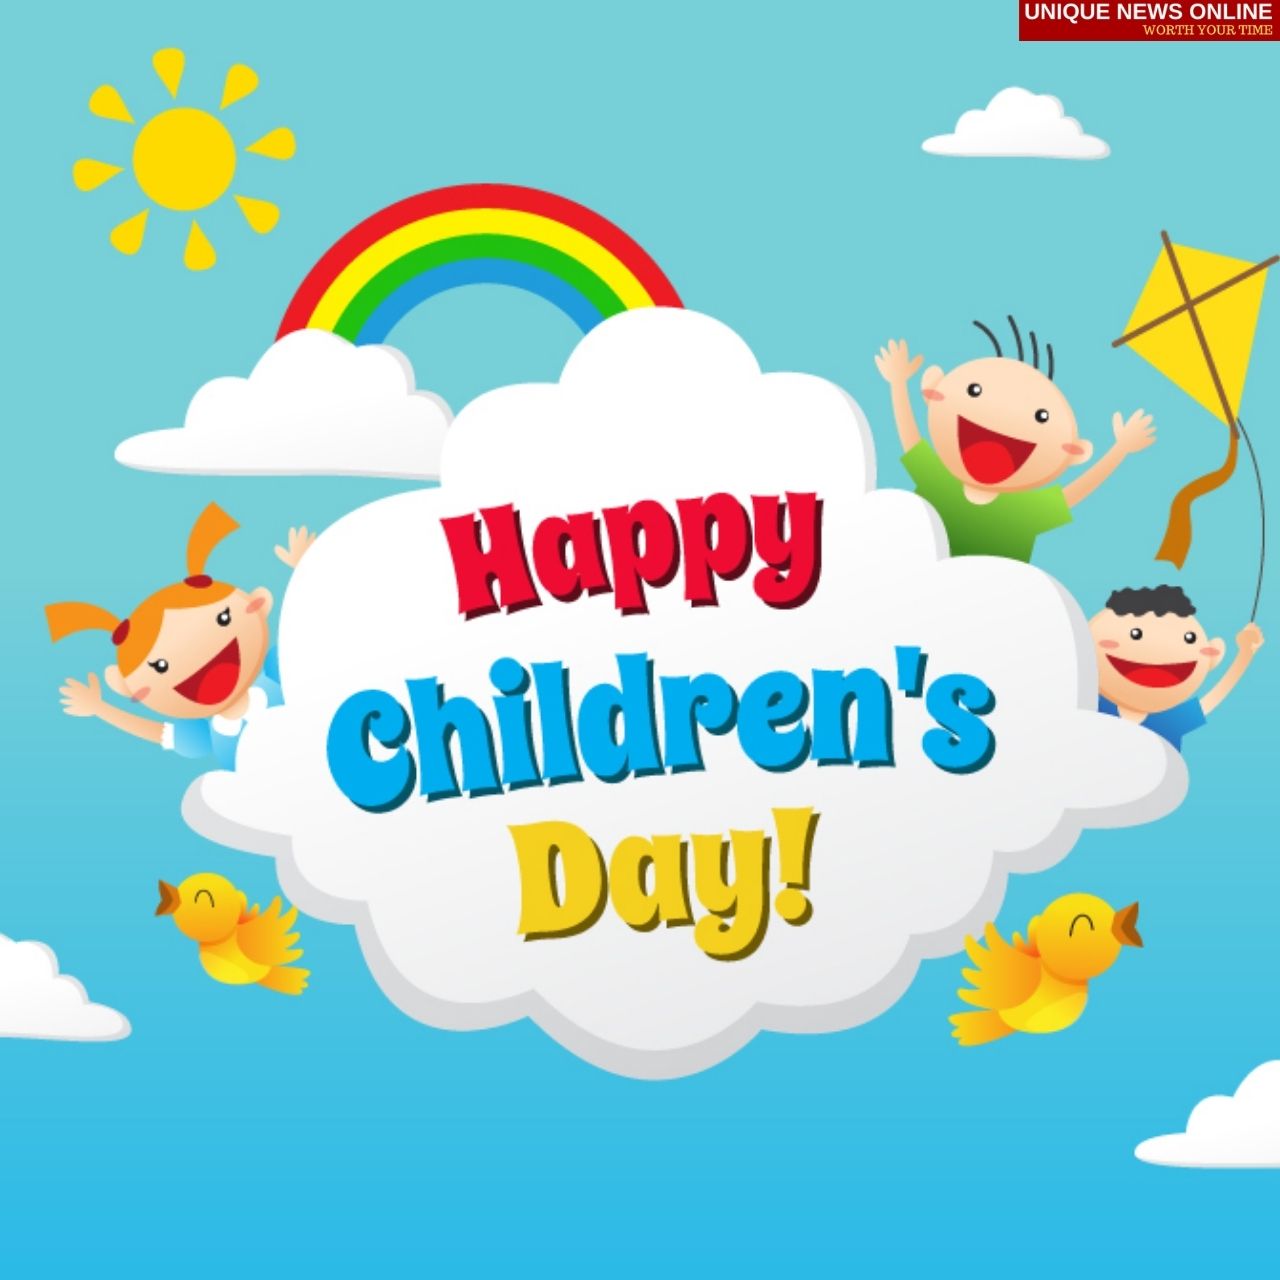 Happy Children's Day 2021 Quotes, HD Images, Greetings, Wishes ...